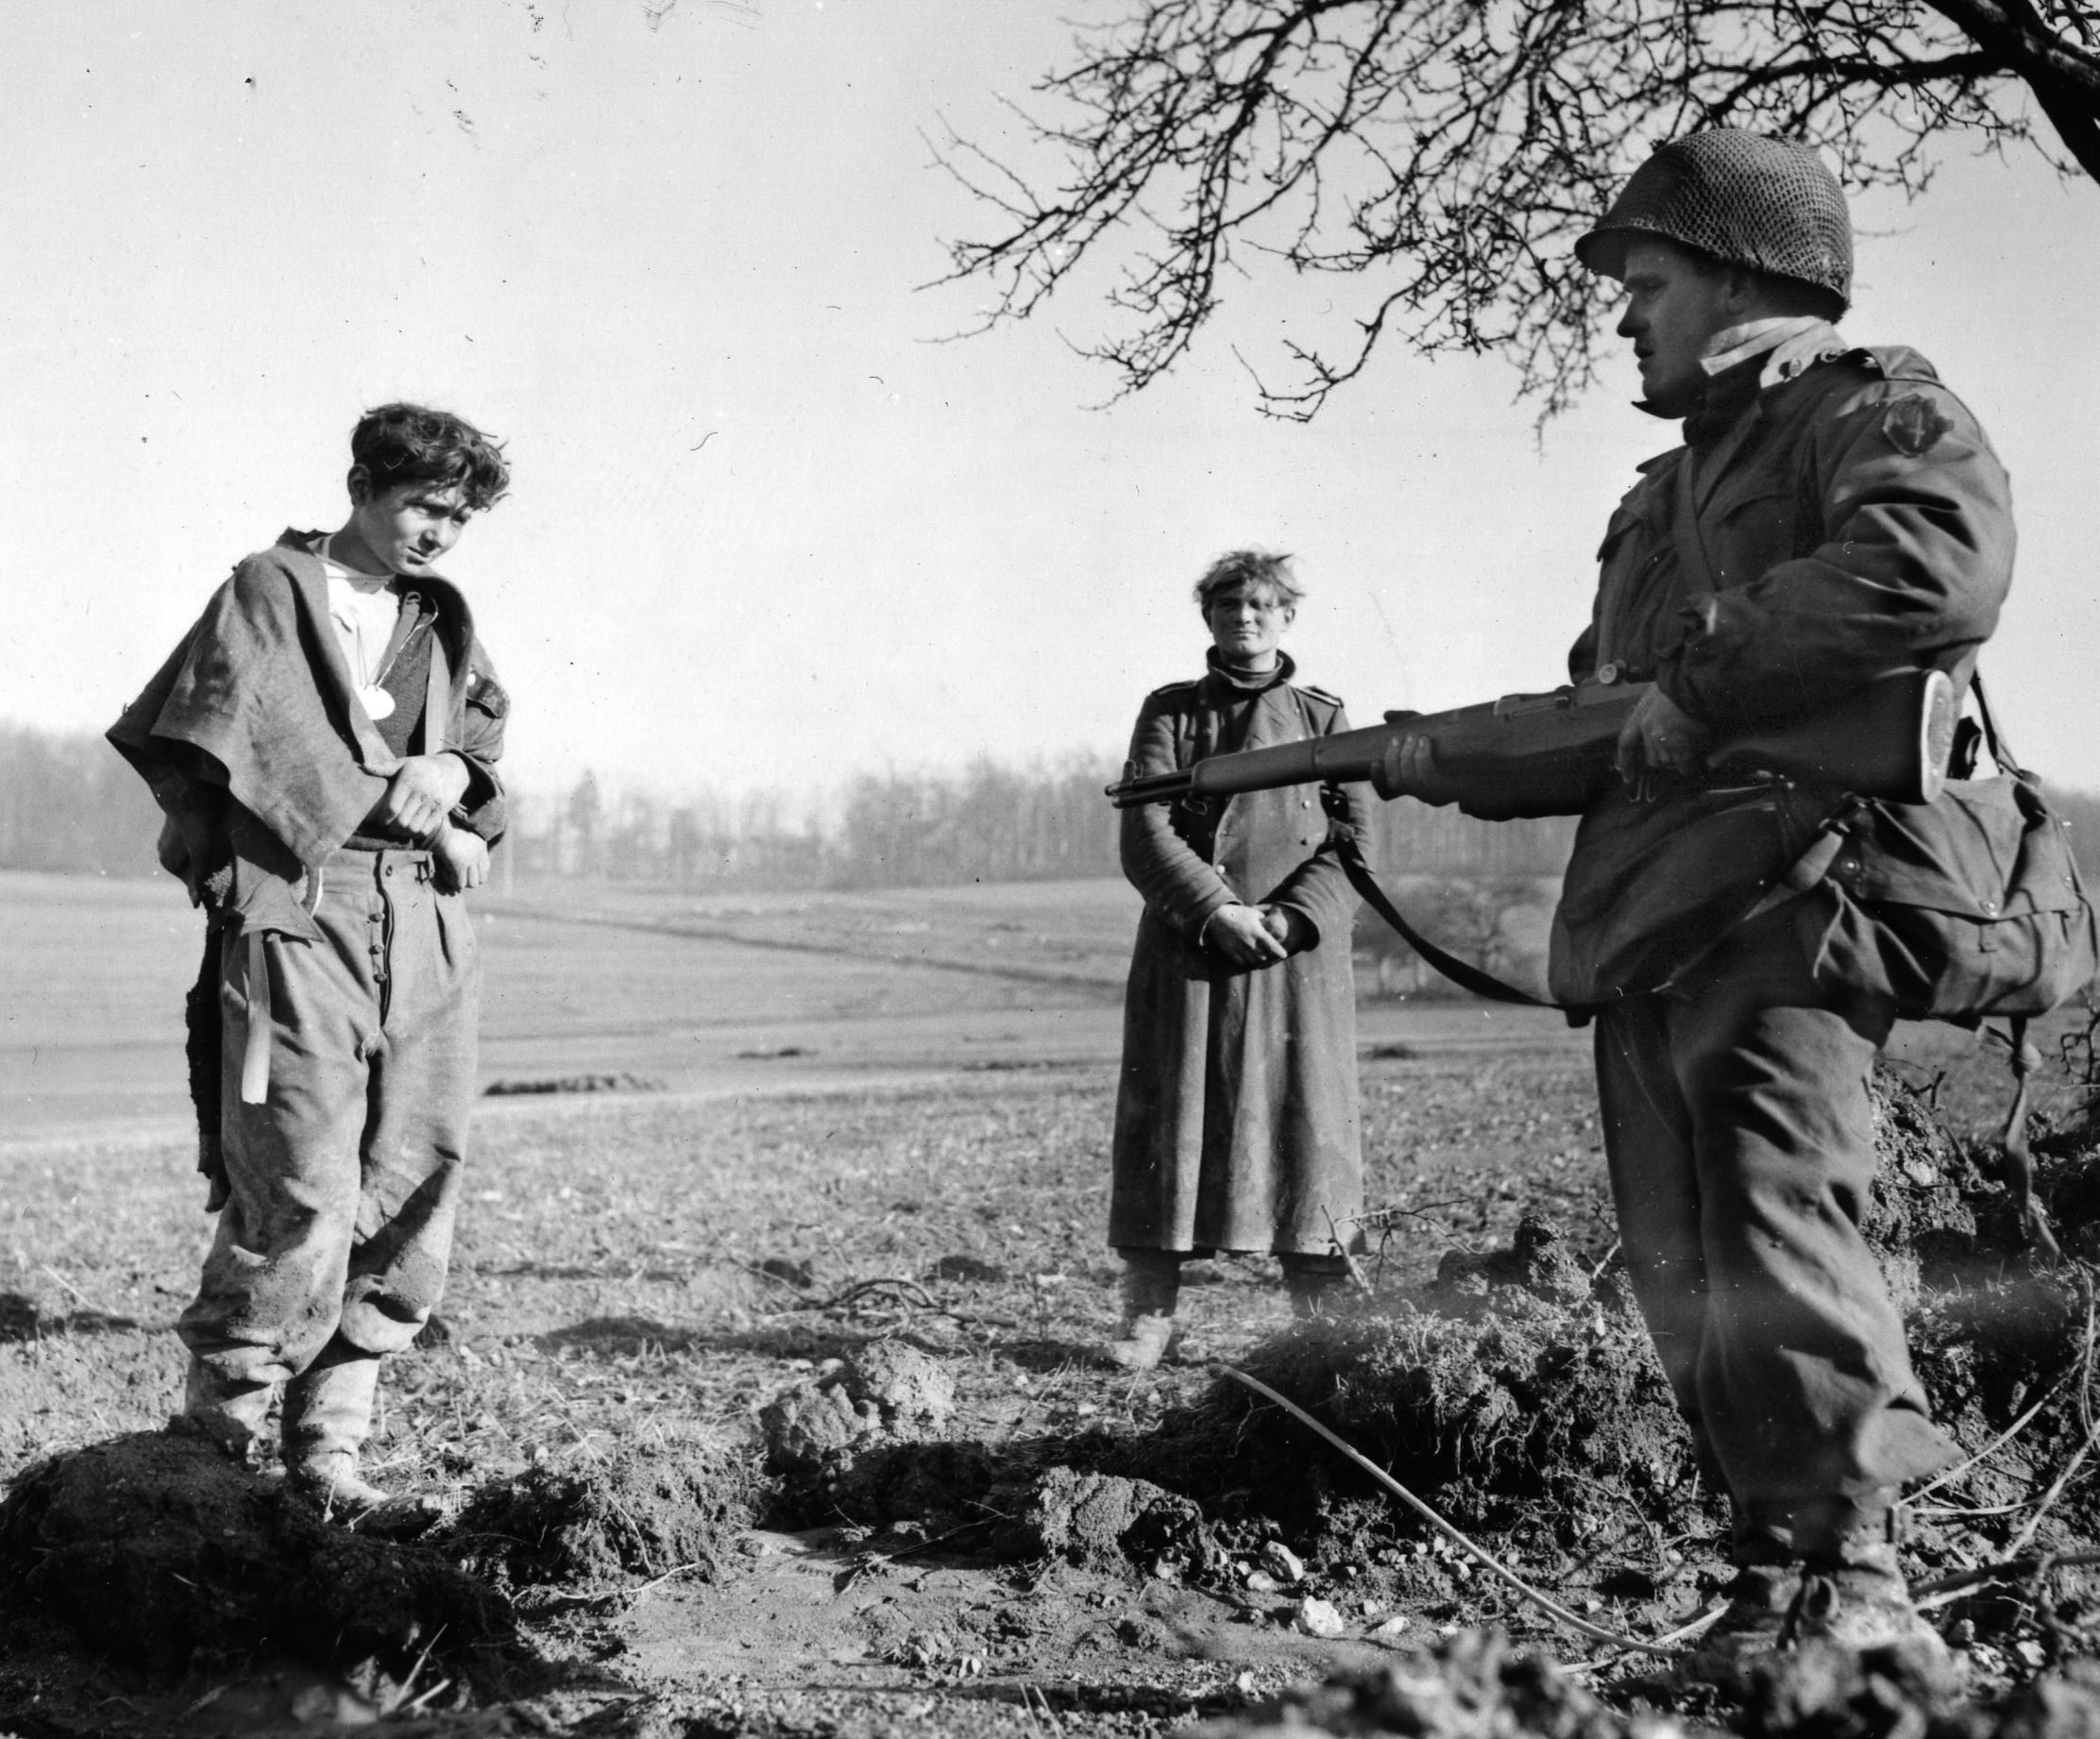 Two German prisoners stand under the watchful eye of an American soldier. These soldiers appear haggard and disconcerted after days of fighting and were captured while trying to infiltrate Allied lines. 